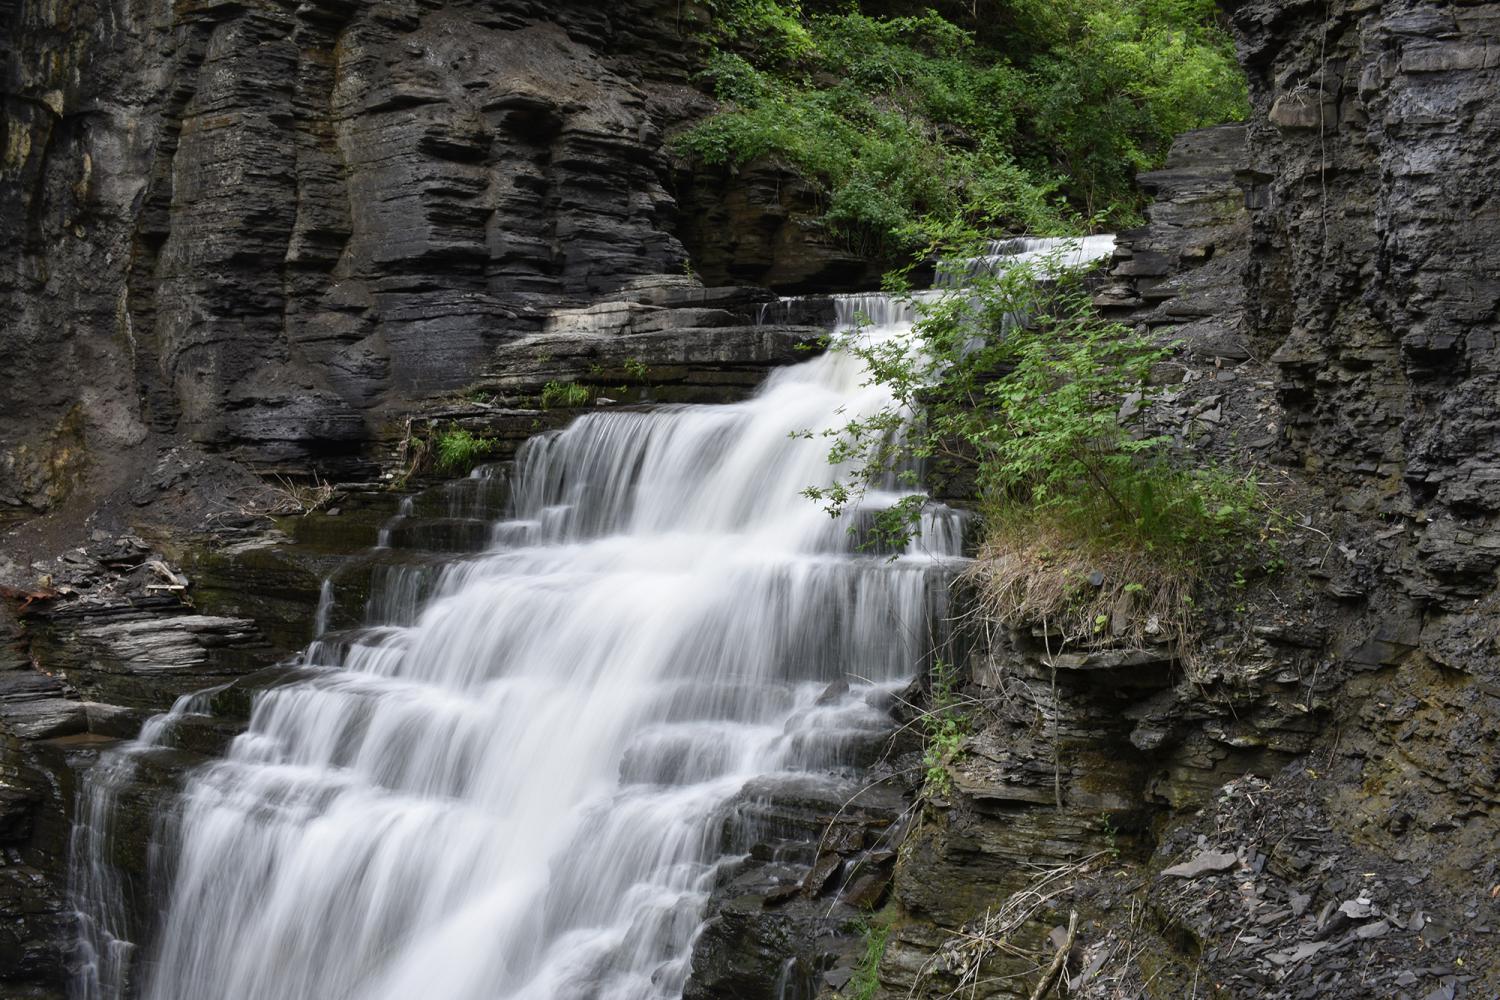 One of the larger waterfalls in Cascadilla Gorge, which runs from Ithaca to Cornell campus